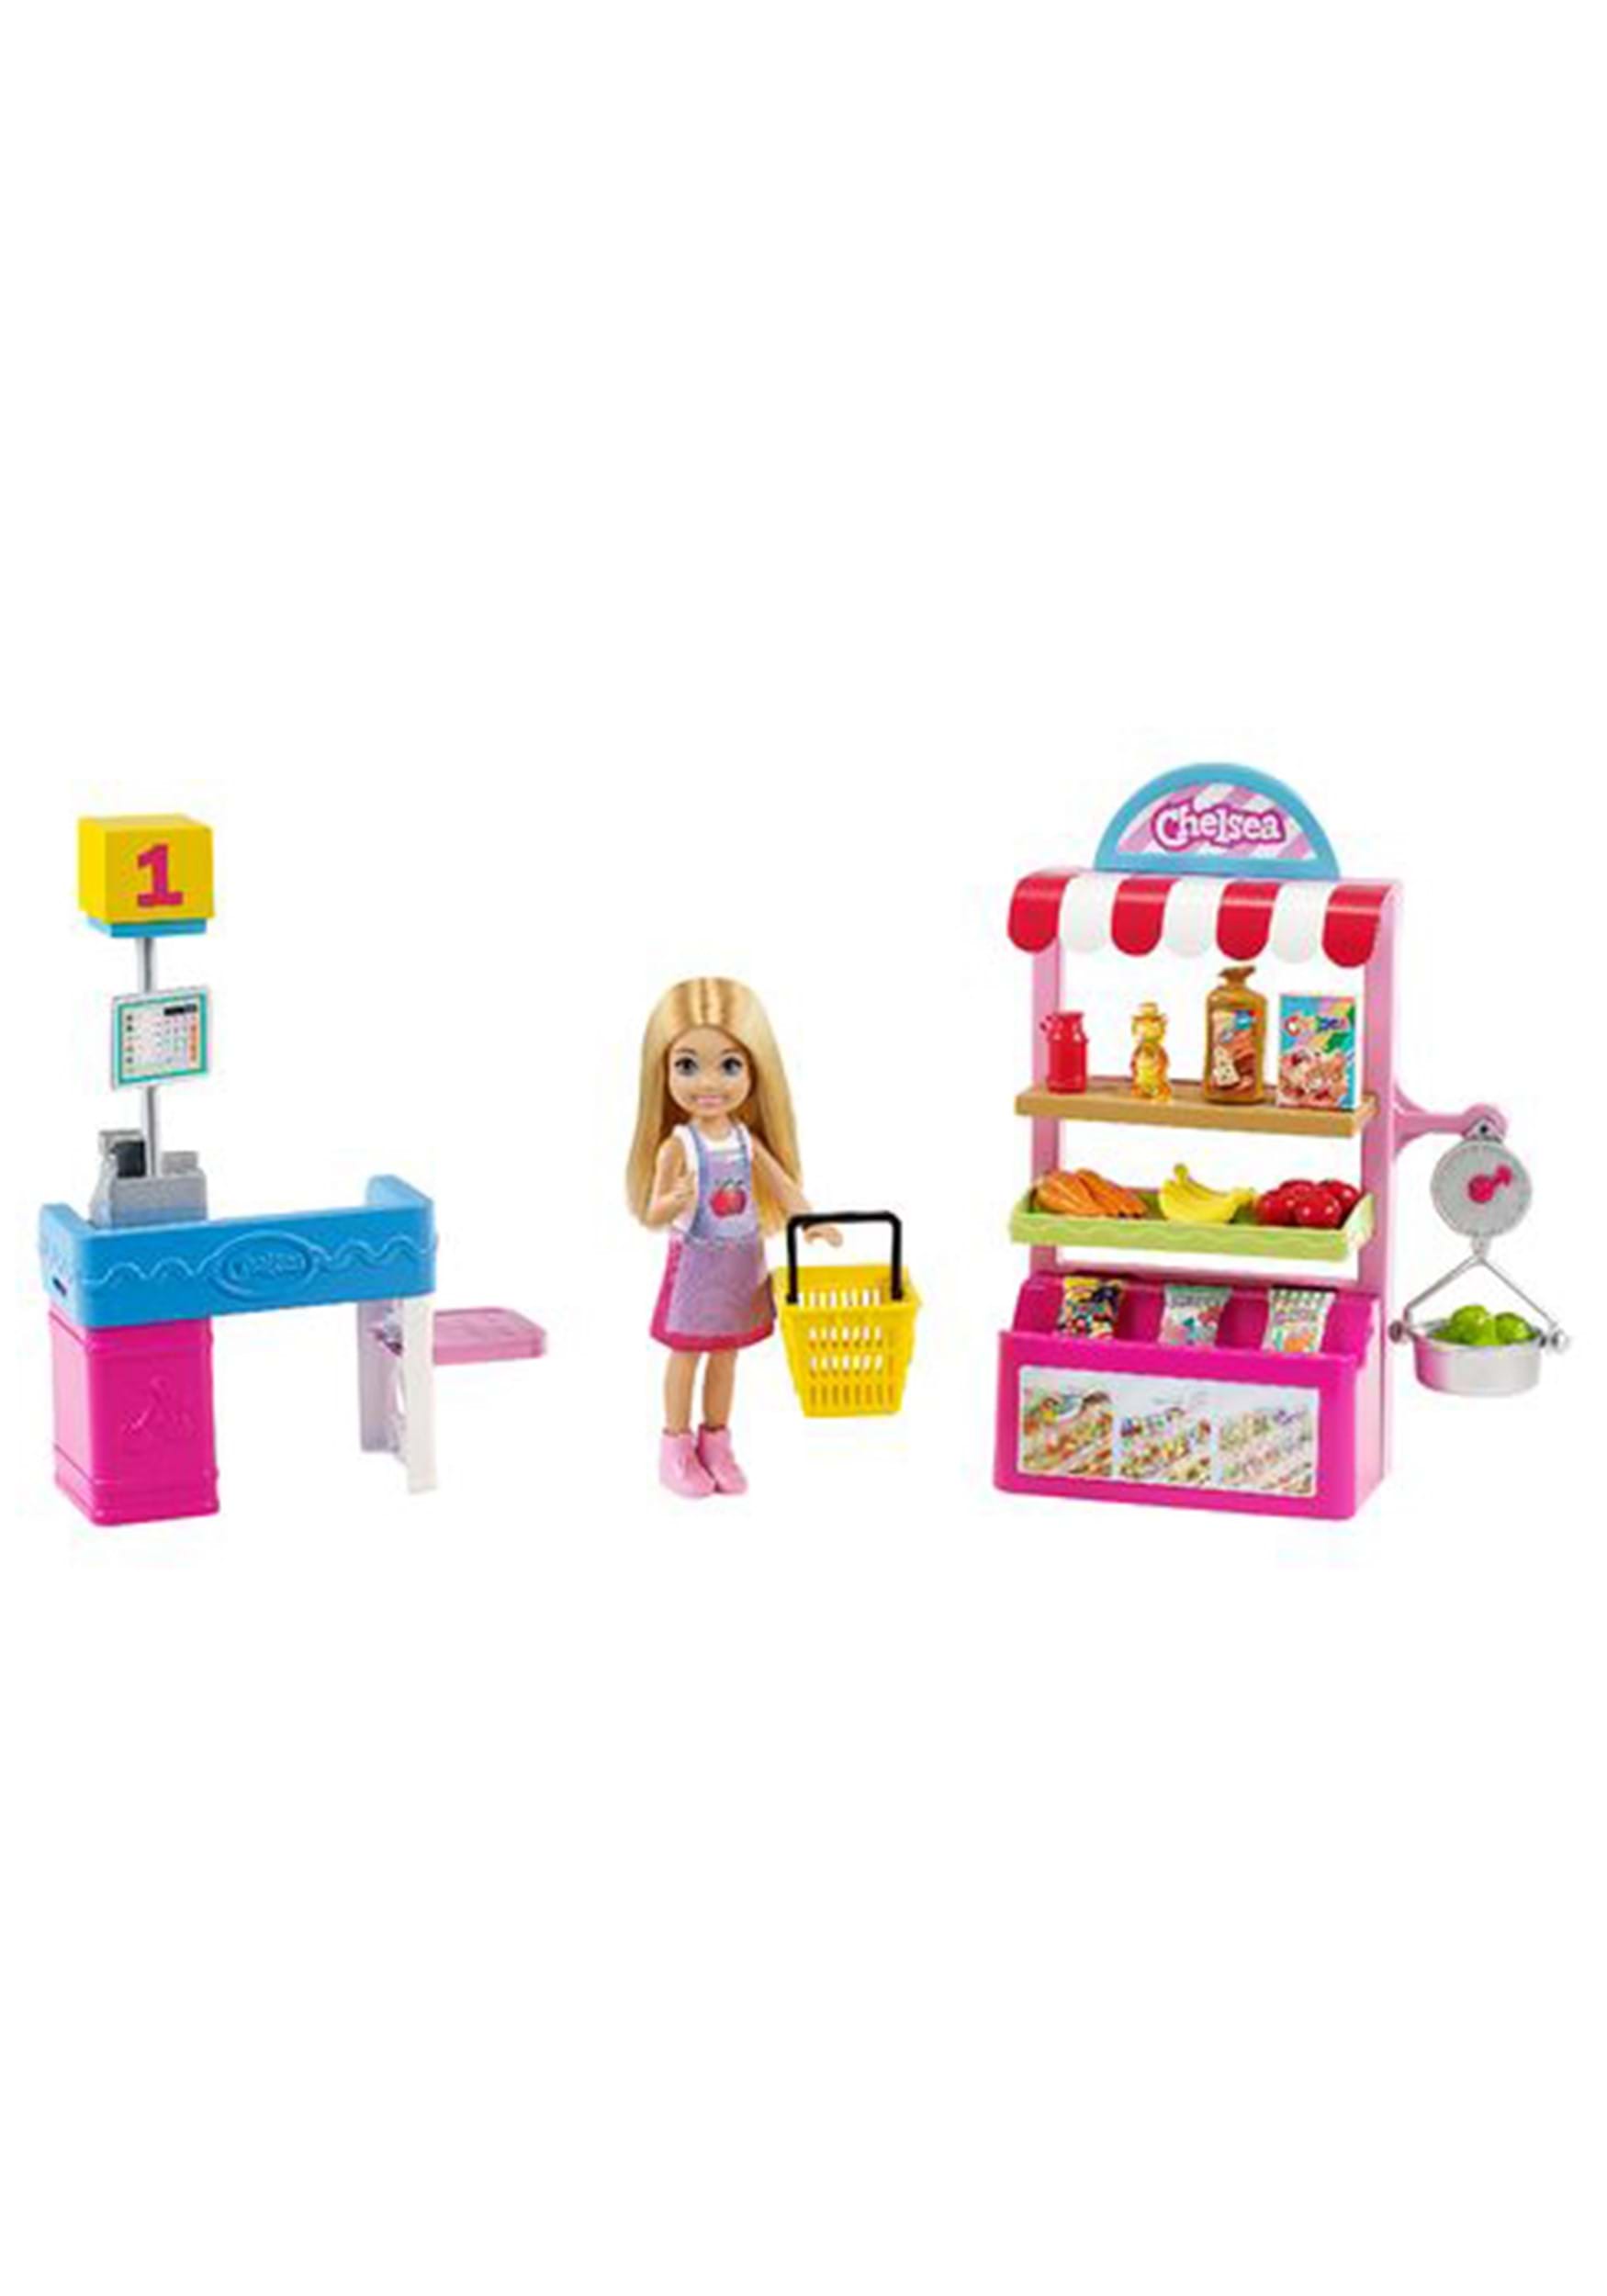 Barbie Chelsea Can Be Snack Stand Playset with Doll